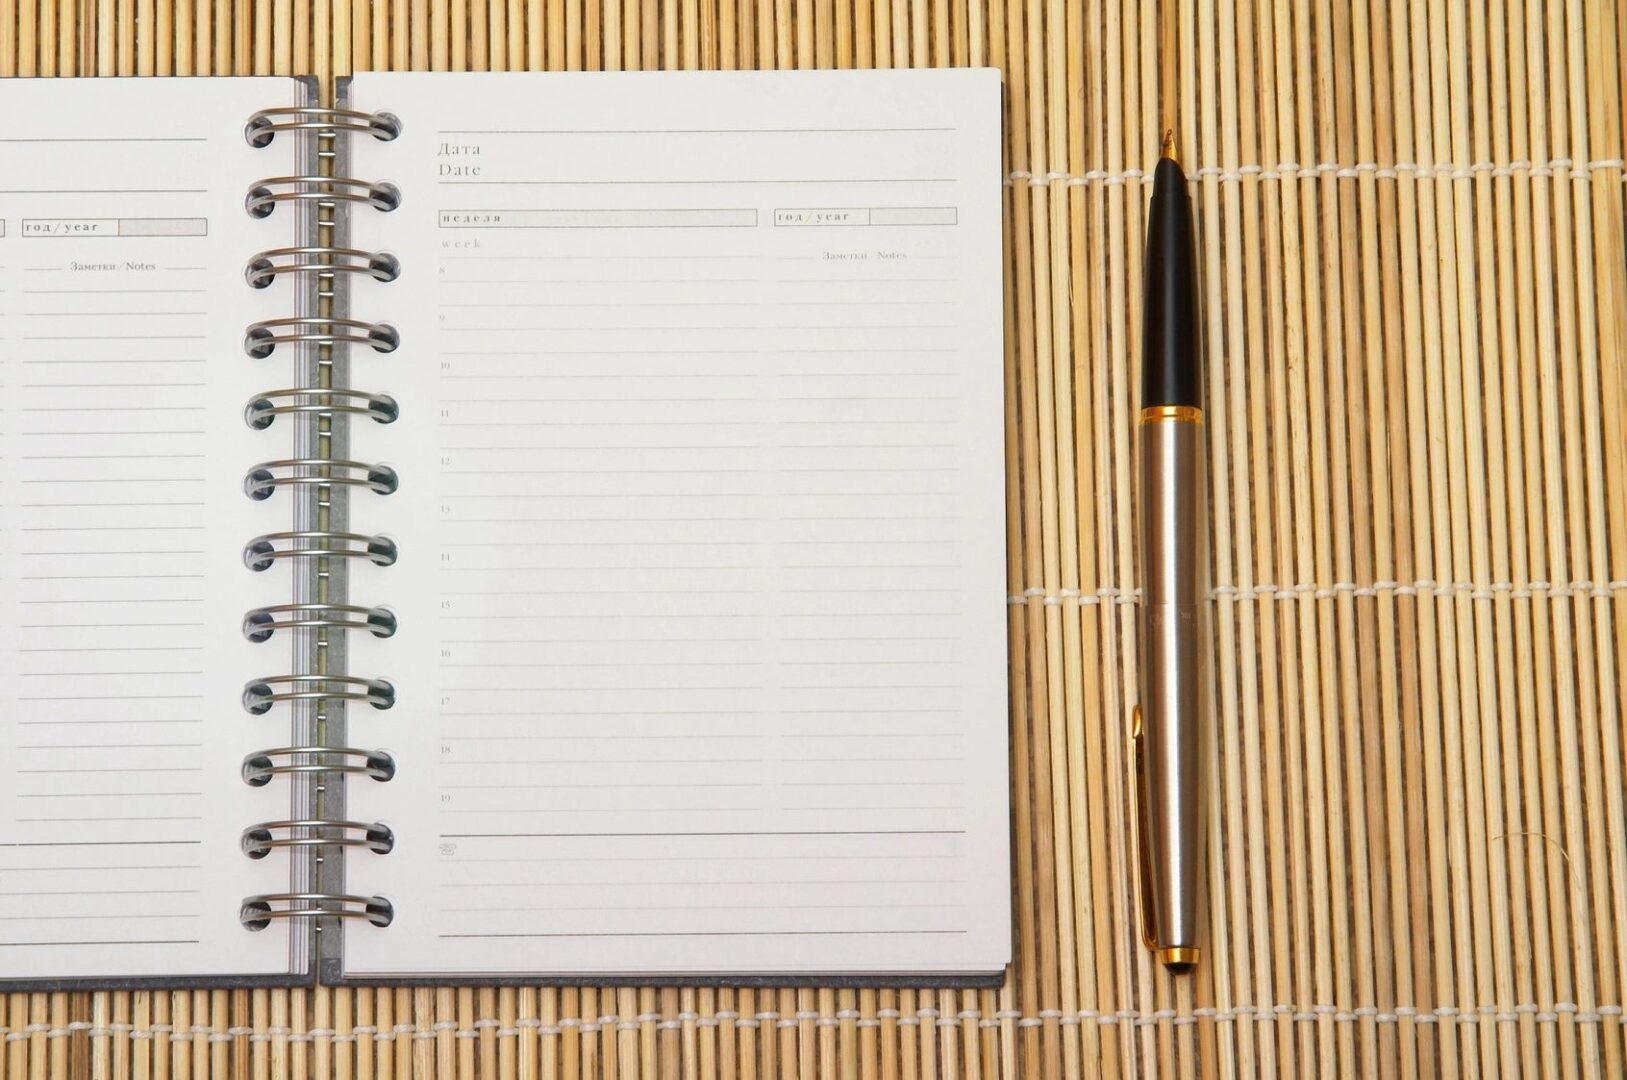 A pen and notebook on a bamboo mat.